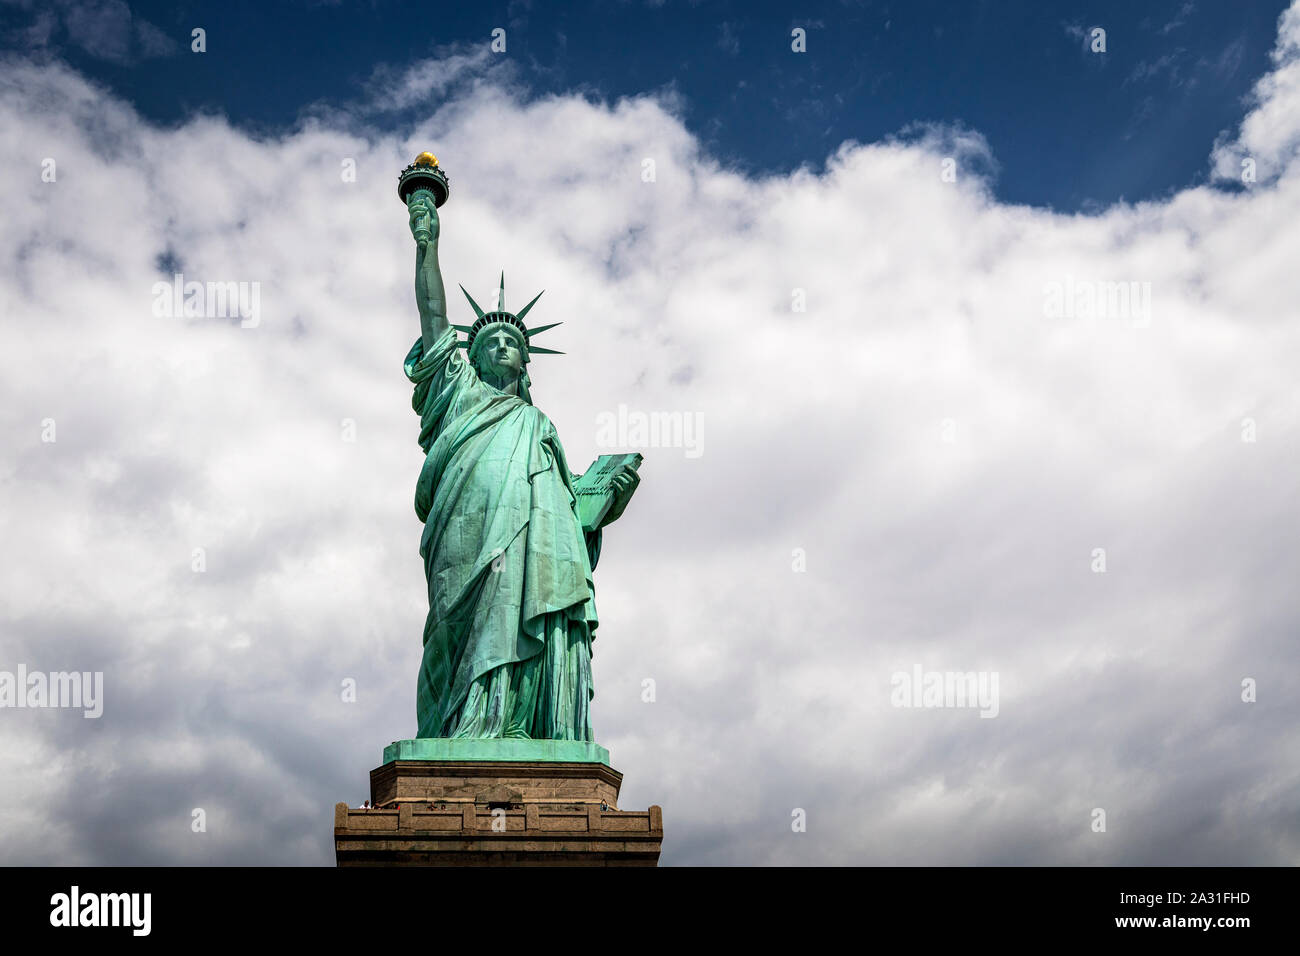 The Statue of Liberty rises into the clouds of New York City, USA. Stock Photo